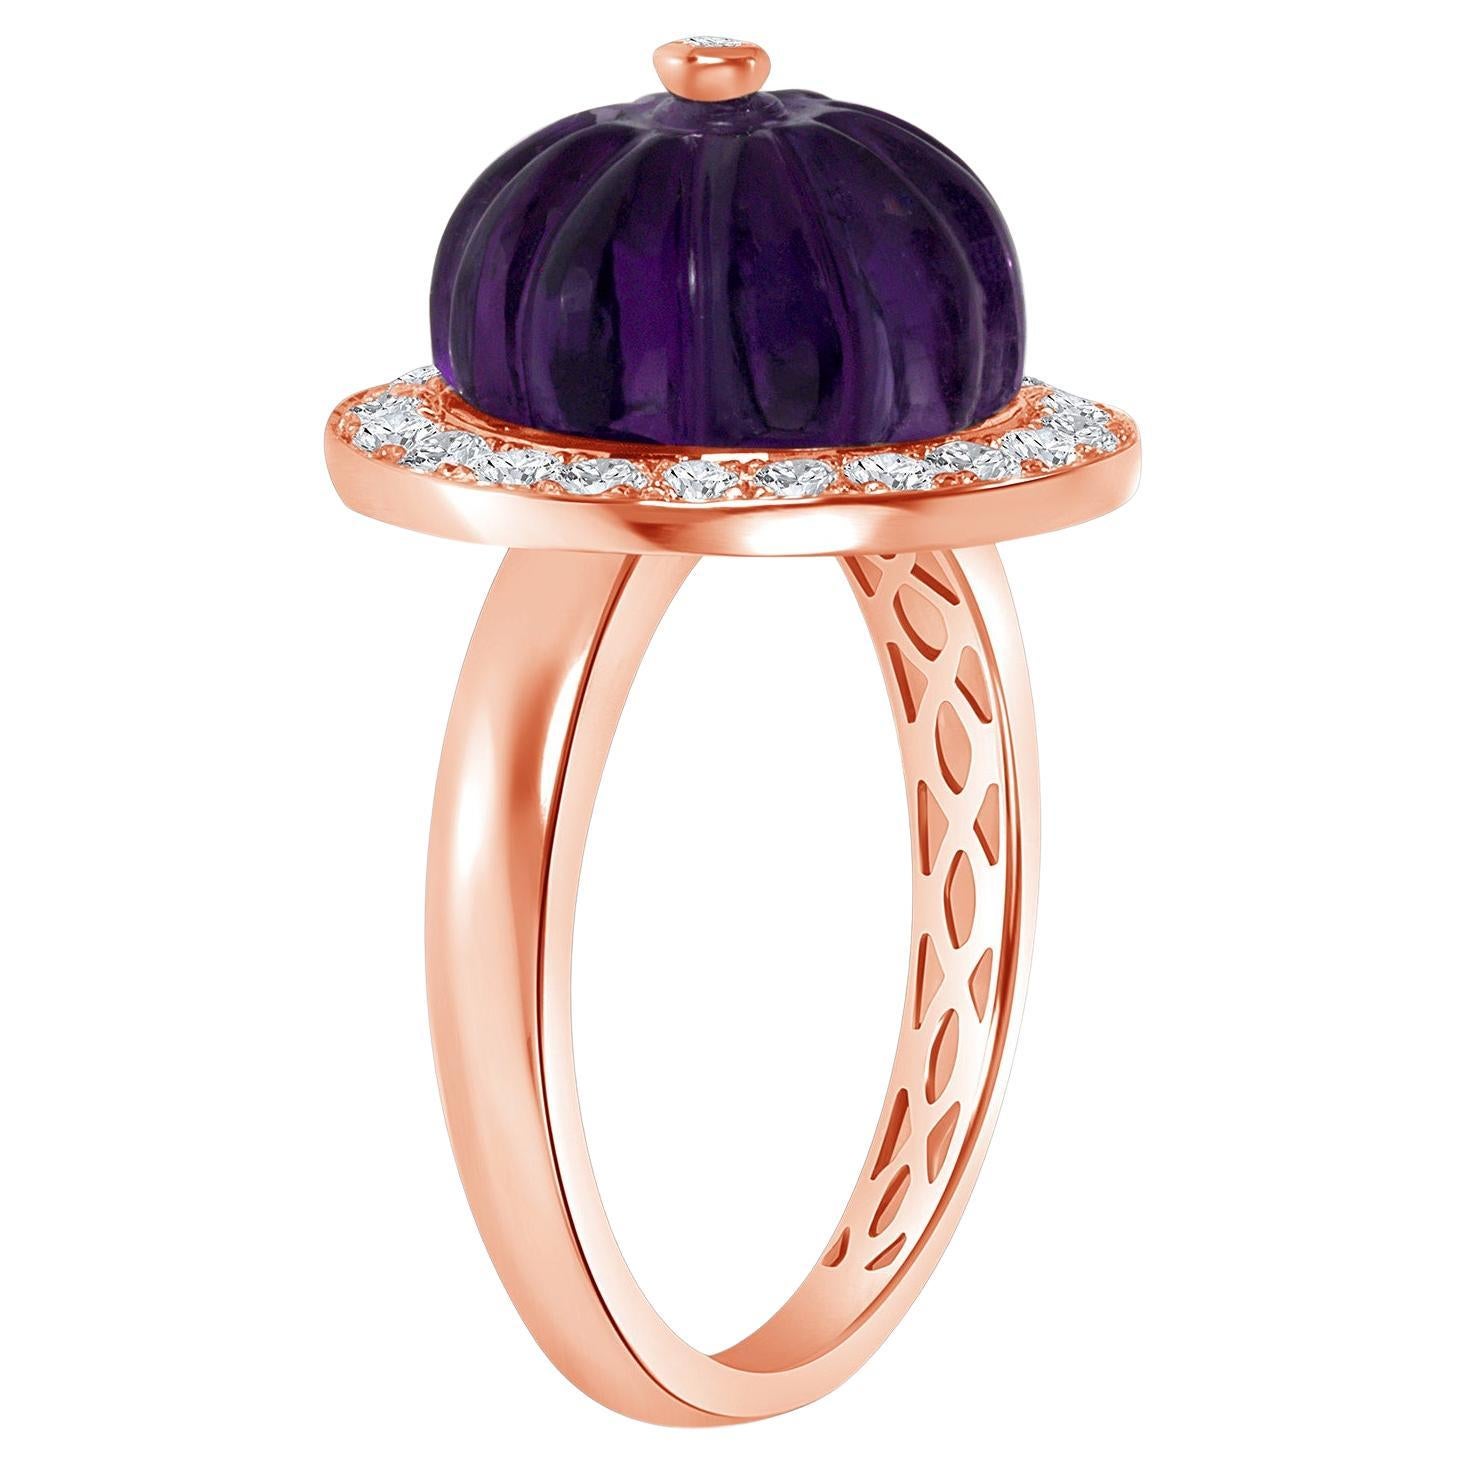 Step into sophistication with this unique ring, meticulously fashioned in luxurious 14k gold, showcasing a mesmerizing amethyst gemstone encircled by shimmering diamonds. Its exquisite design exudes elegance and style, making it the perfect